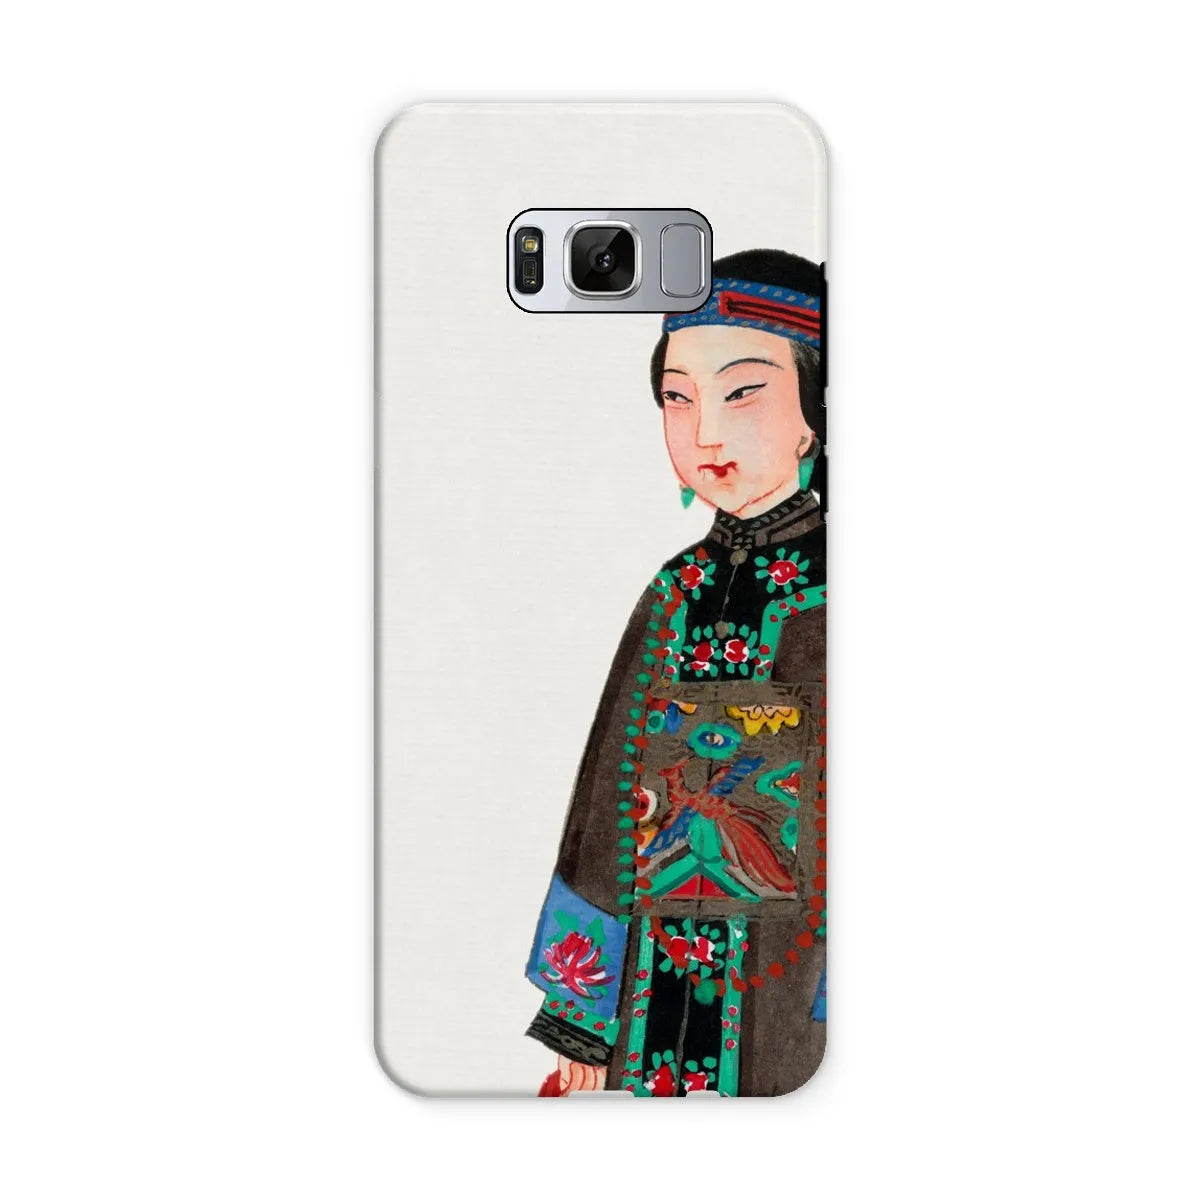 Noblewoman At Court - Chinese Aesthetic Art Phone Case - Samsung Galaxy S8 / Matte - Mobile Phone Cases - Aesthetic Art